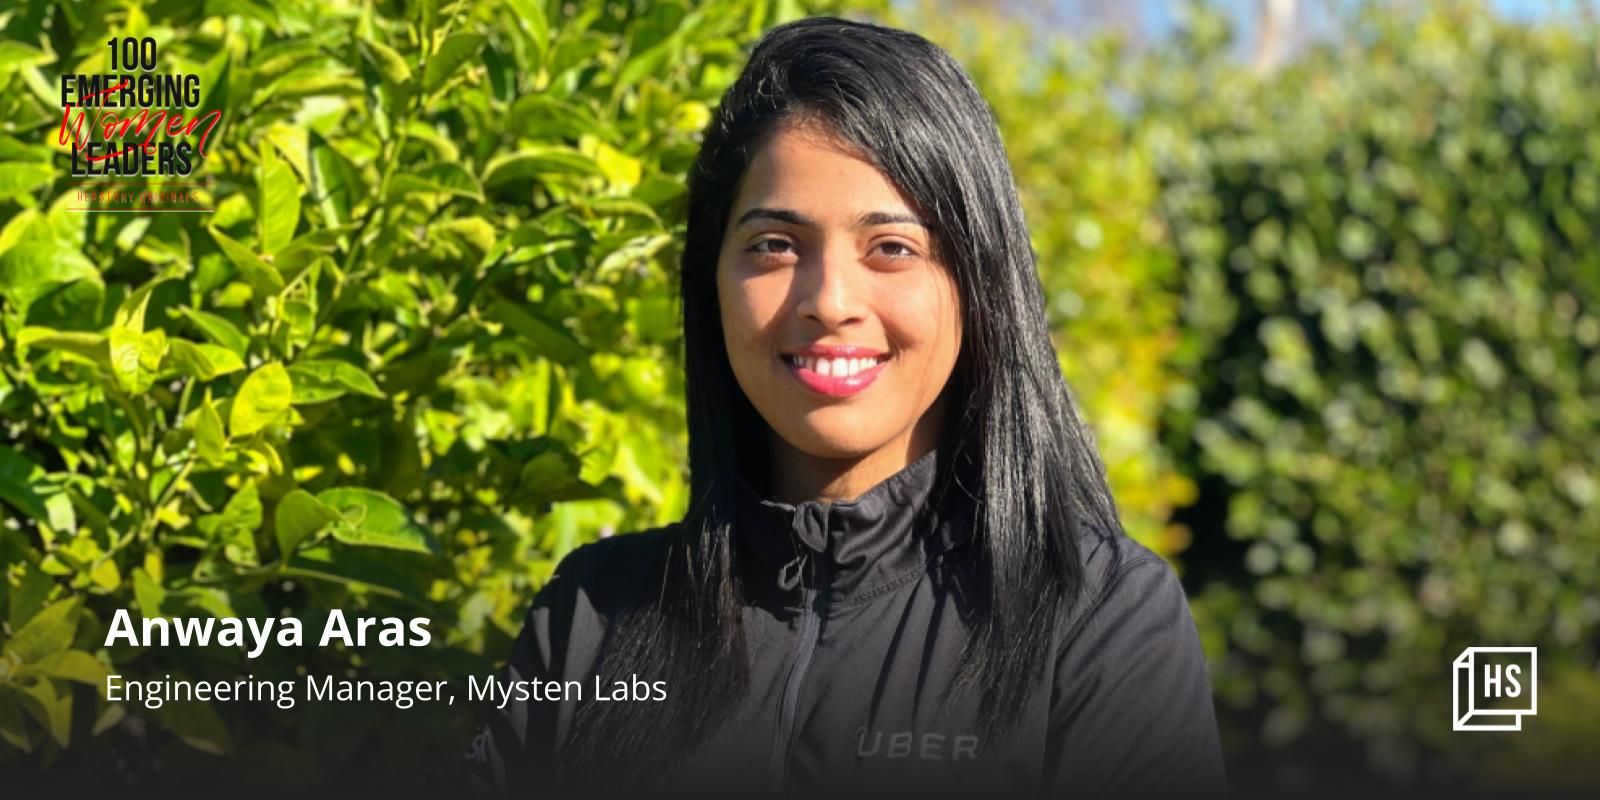 [100 Emerging Women Leaders] Why this former Uber engineering manager believes in the power of code